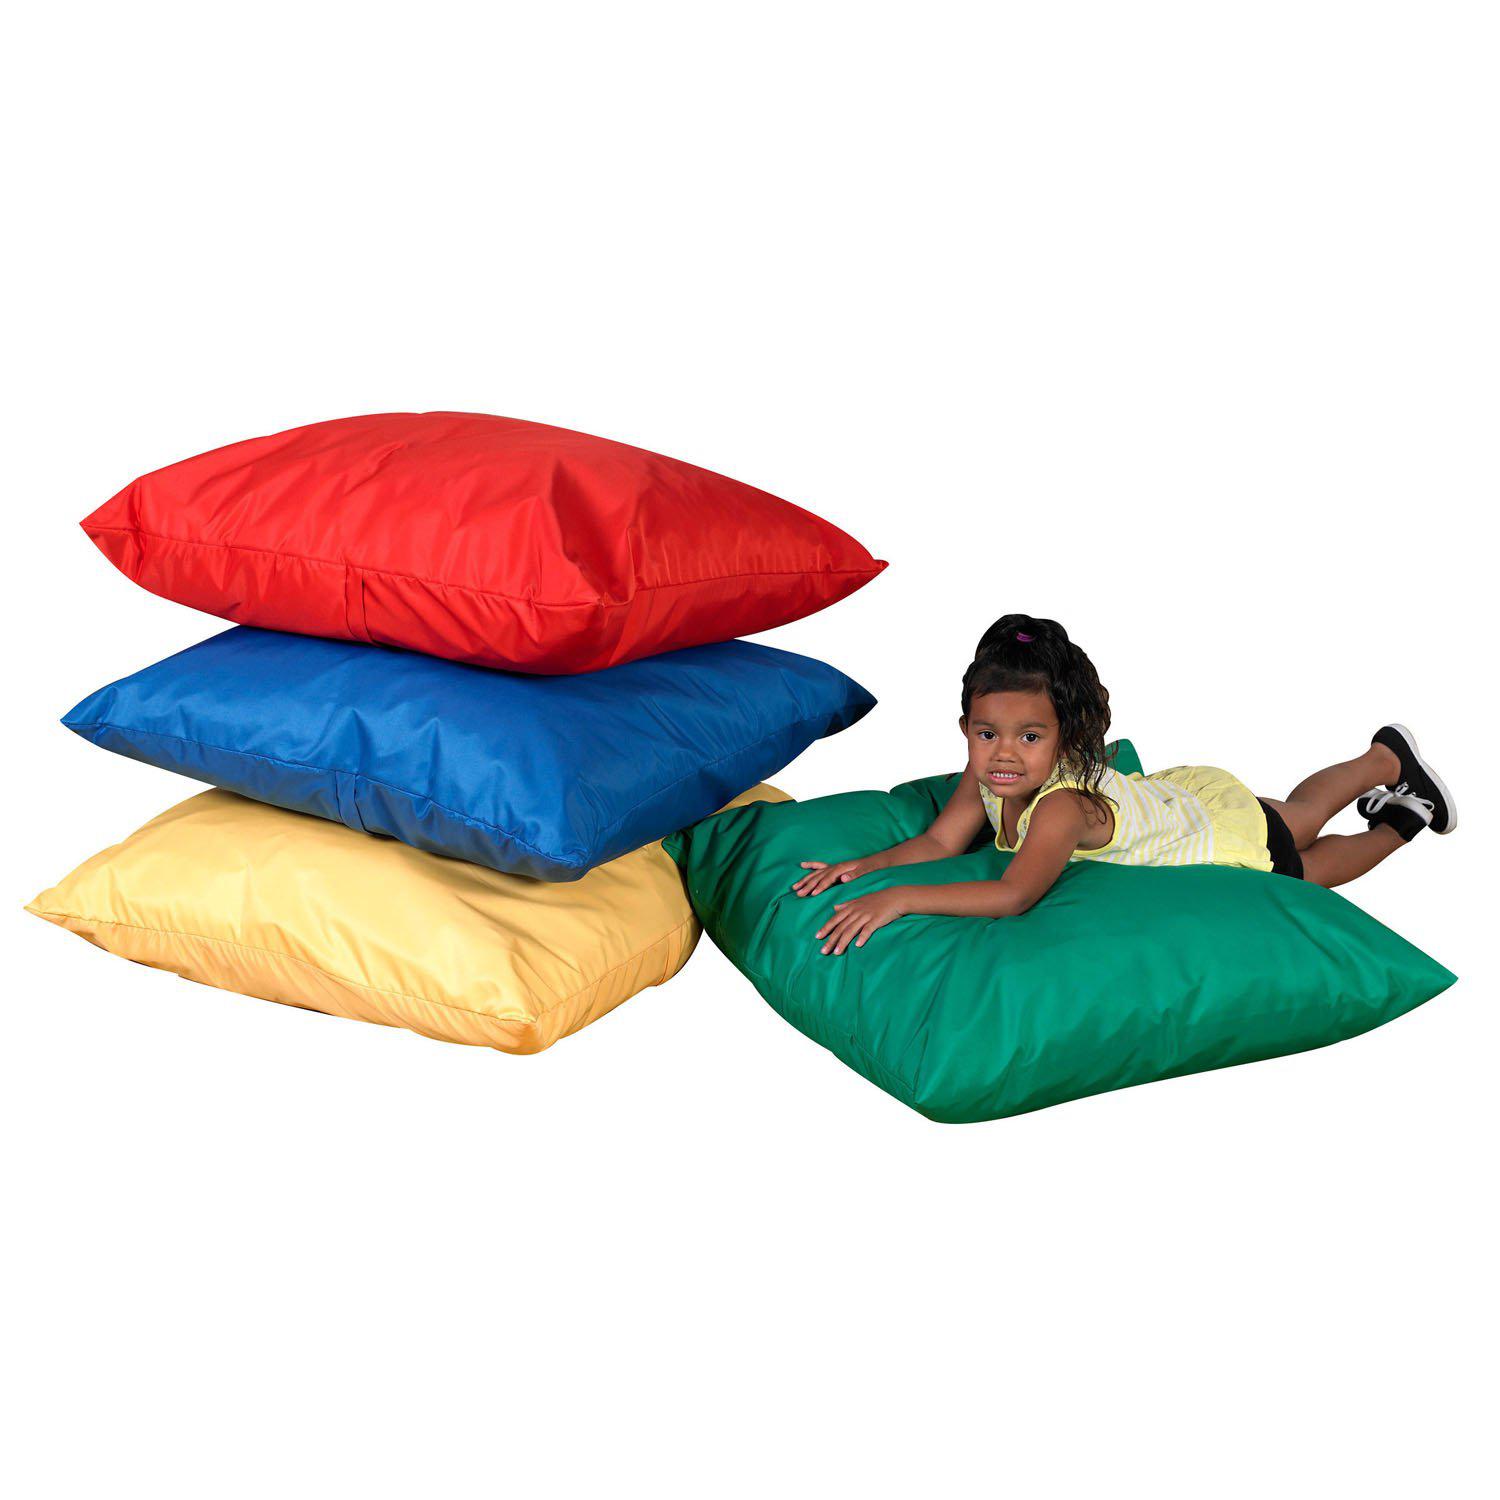 27" Cozy Floor Pillows - Primary Colors -  Set of 4